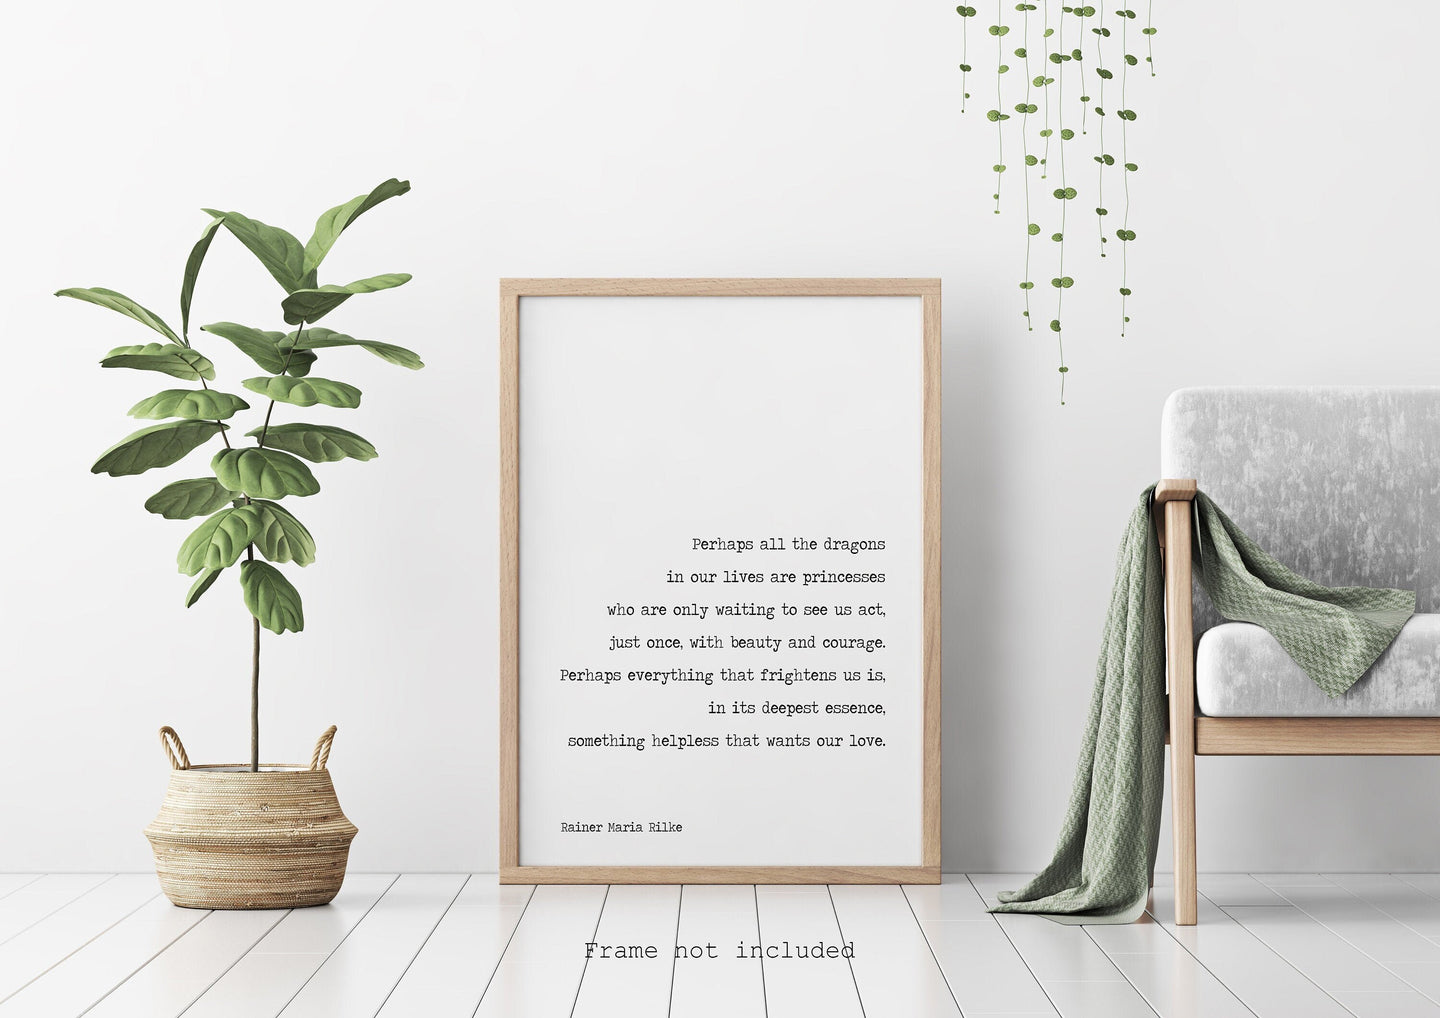 Rainer Maria Rilke - Letters to a Young Poet - Dragons in our lives are princesses Poem Art Print Home Office Decor poetry wall art UNFRAMED